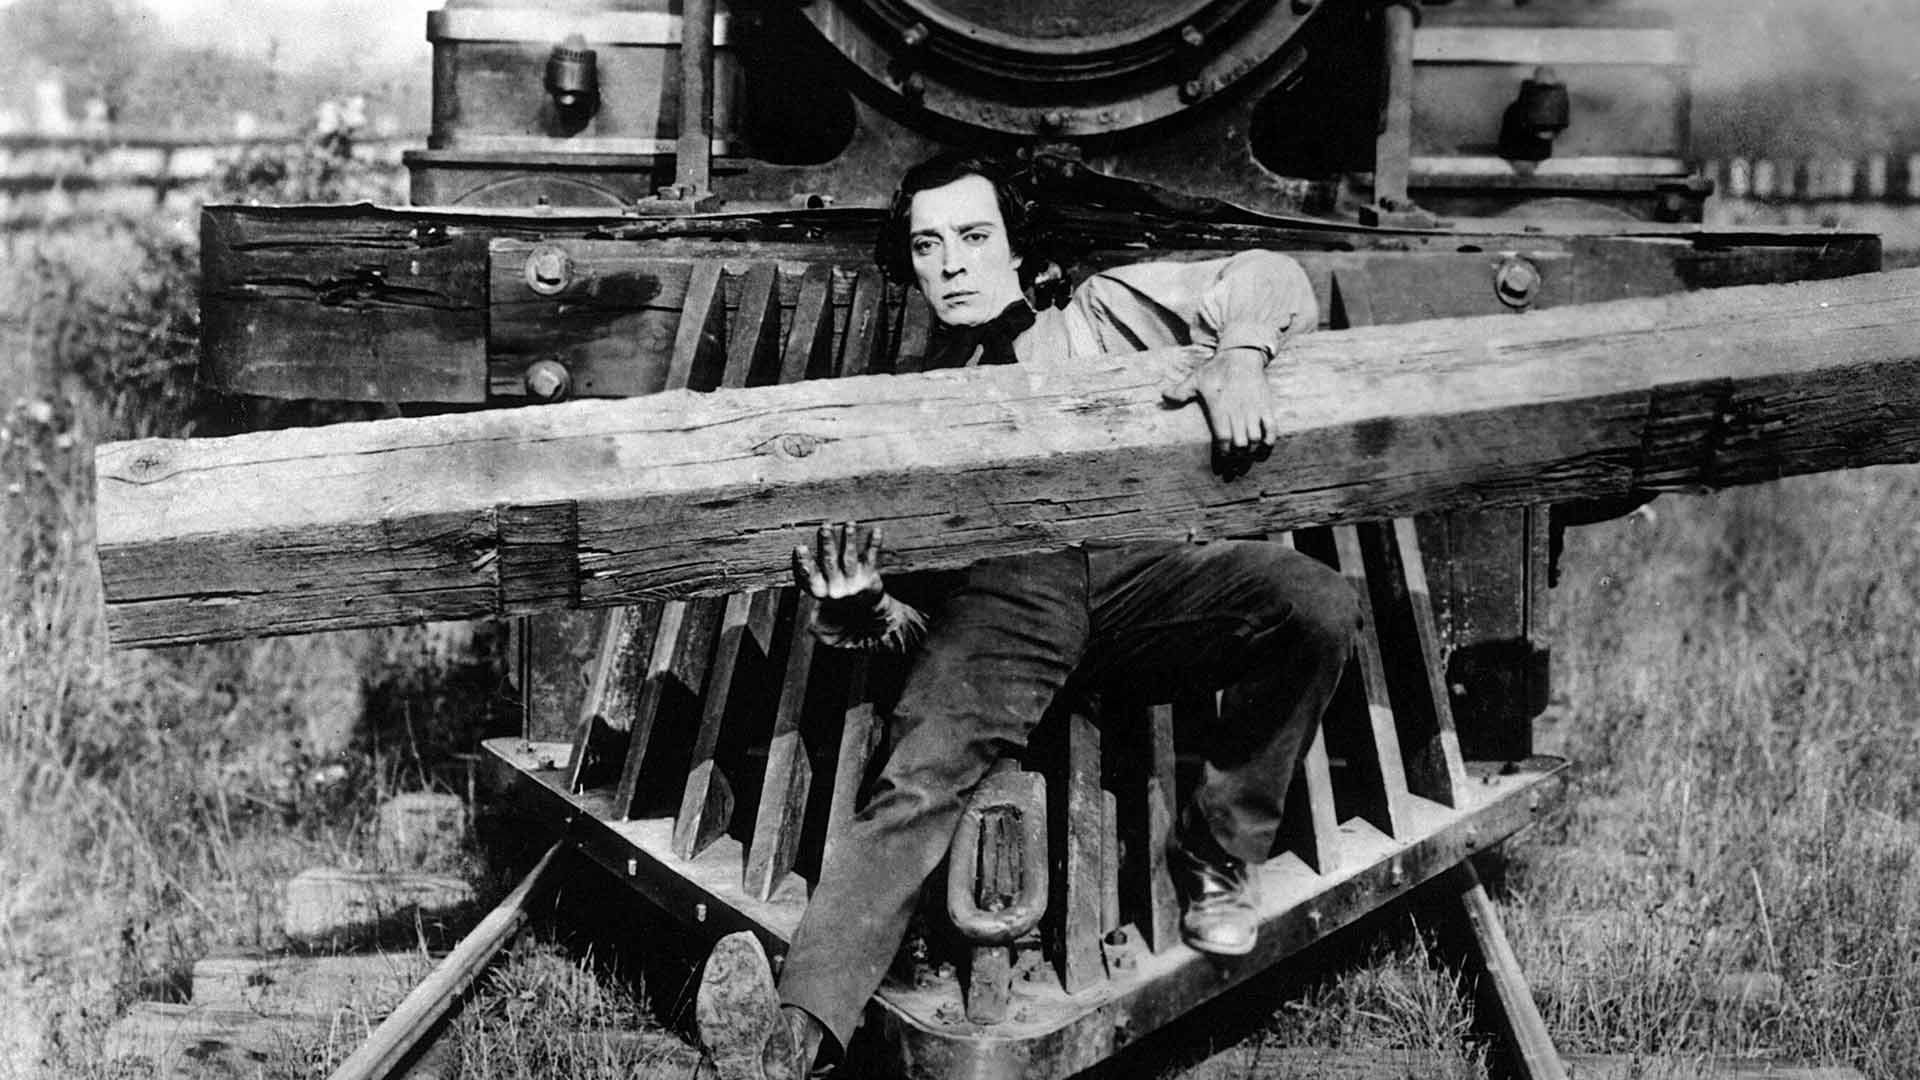 Buster Keaton in The General falls in front of the train with a piece of wood